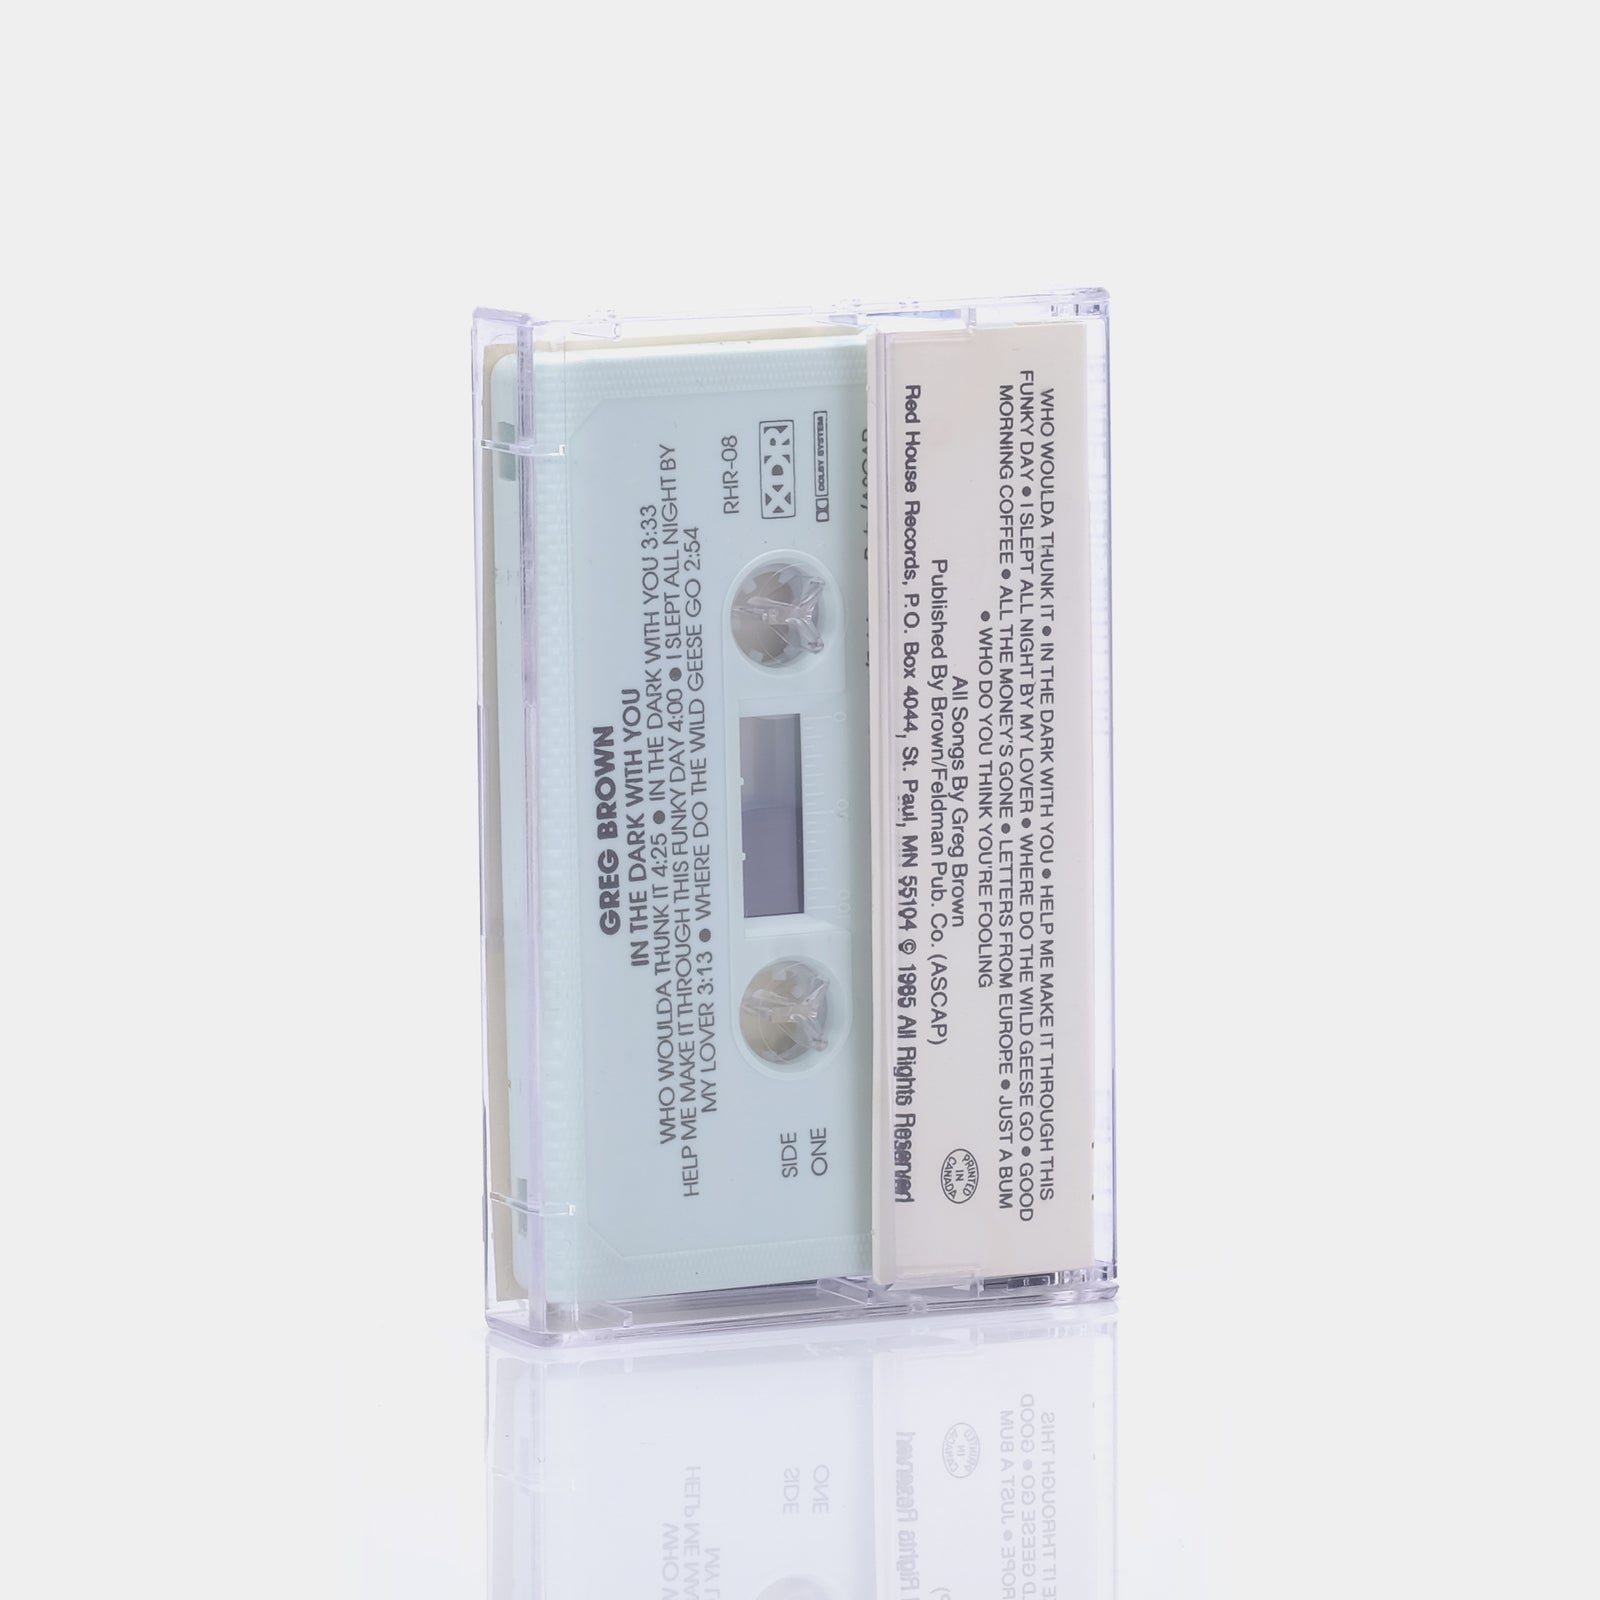 Greg Brown - In The Dark With You Cassette Tape